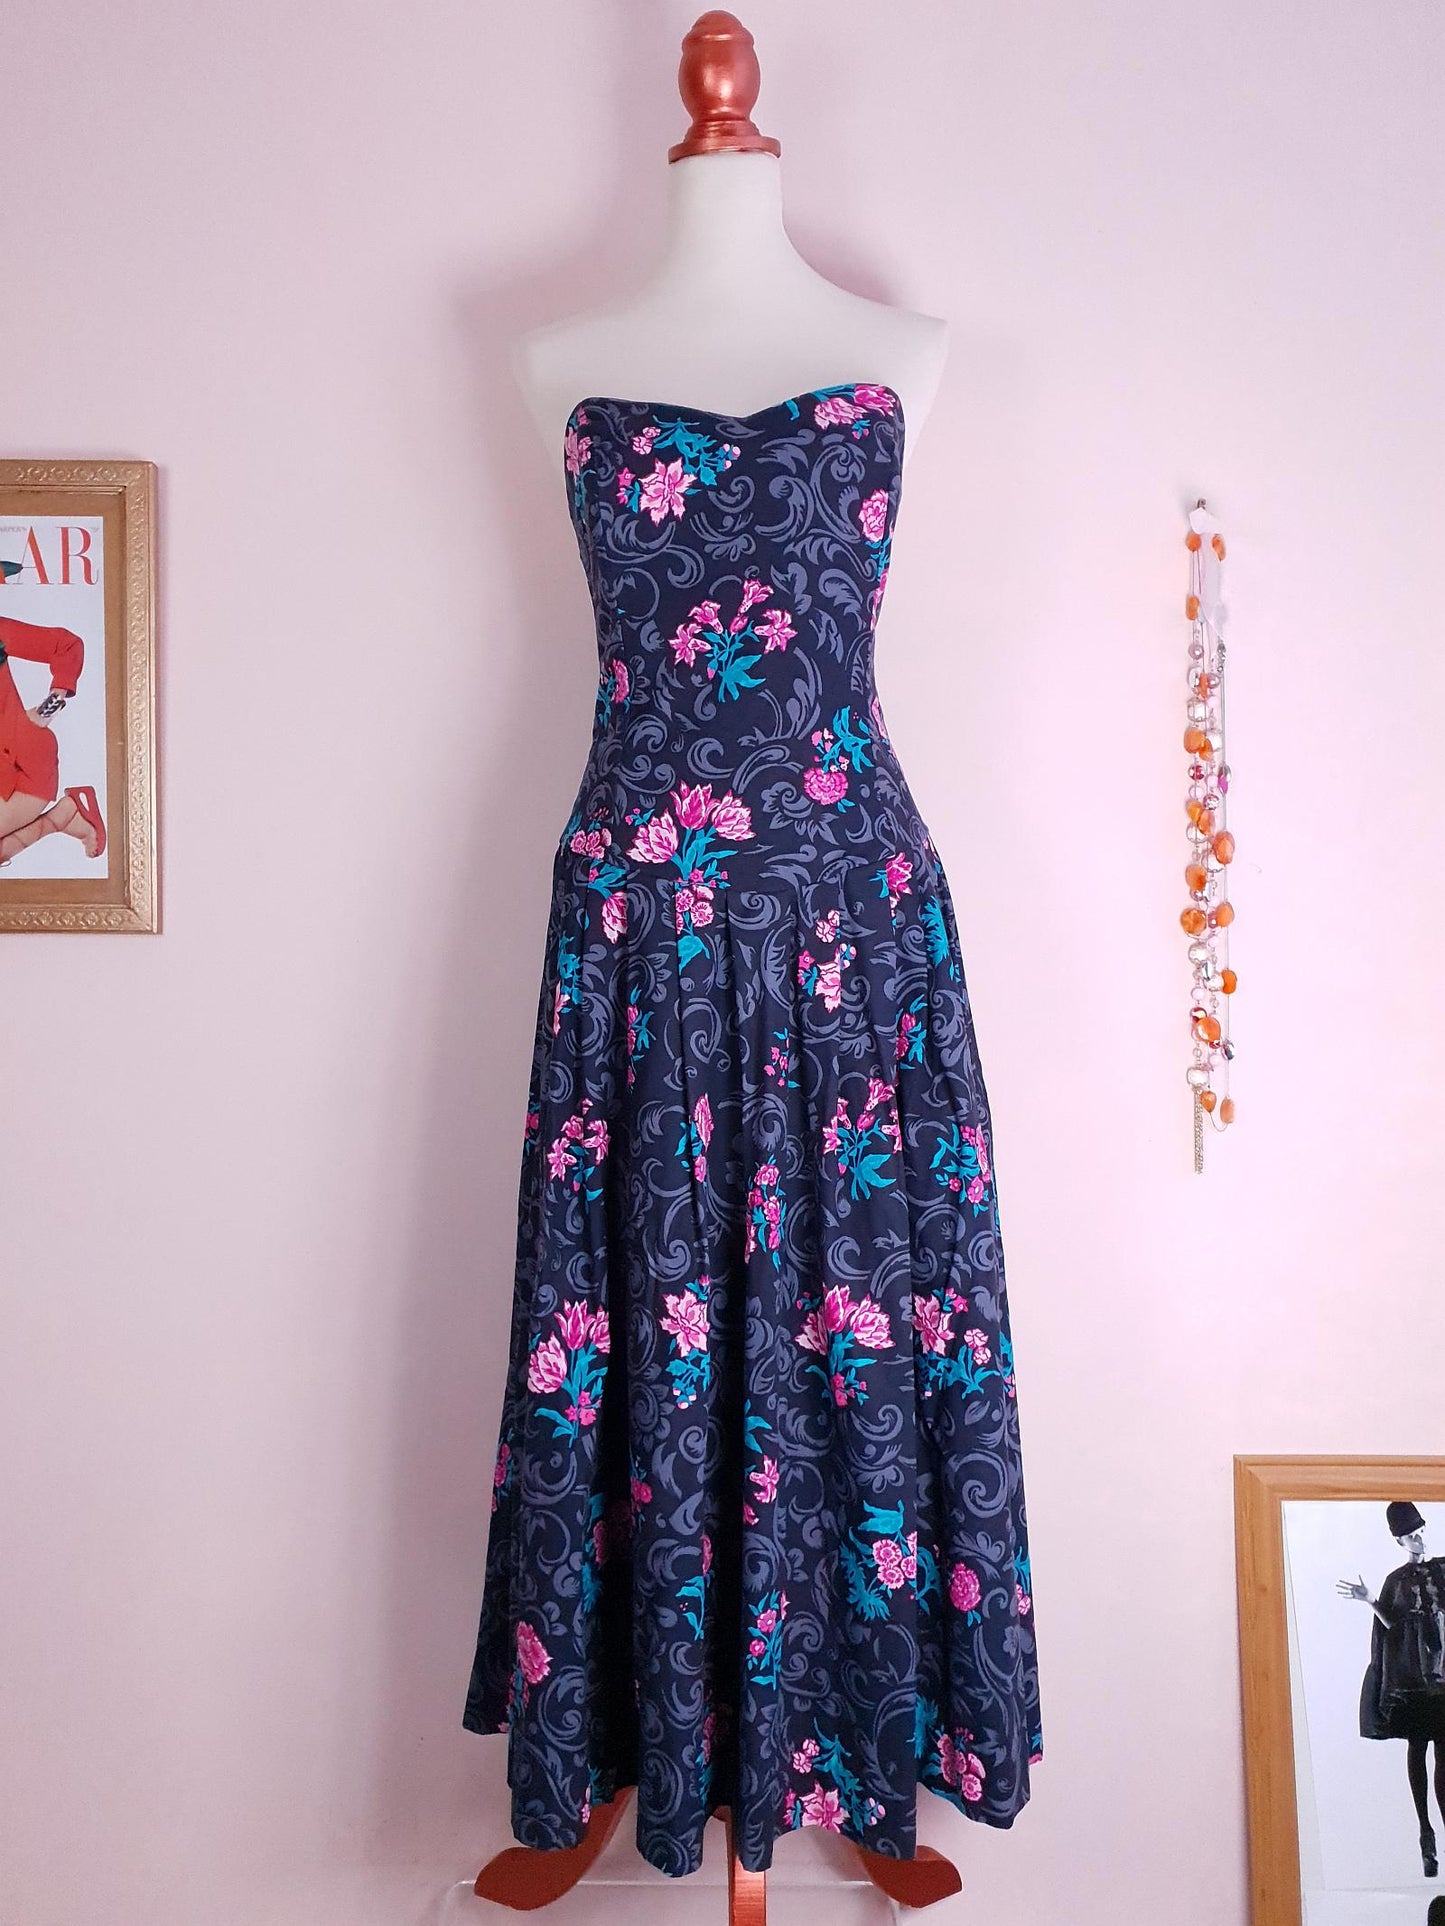 English Classics - Vintage 1980s Laura Ashley Floral Strapless Party Dress - Size 12/14